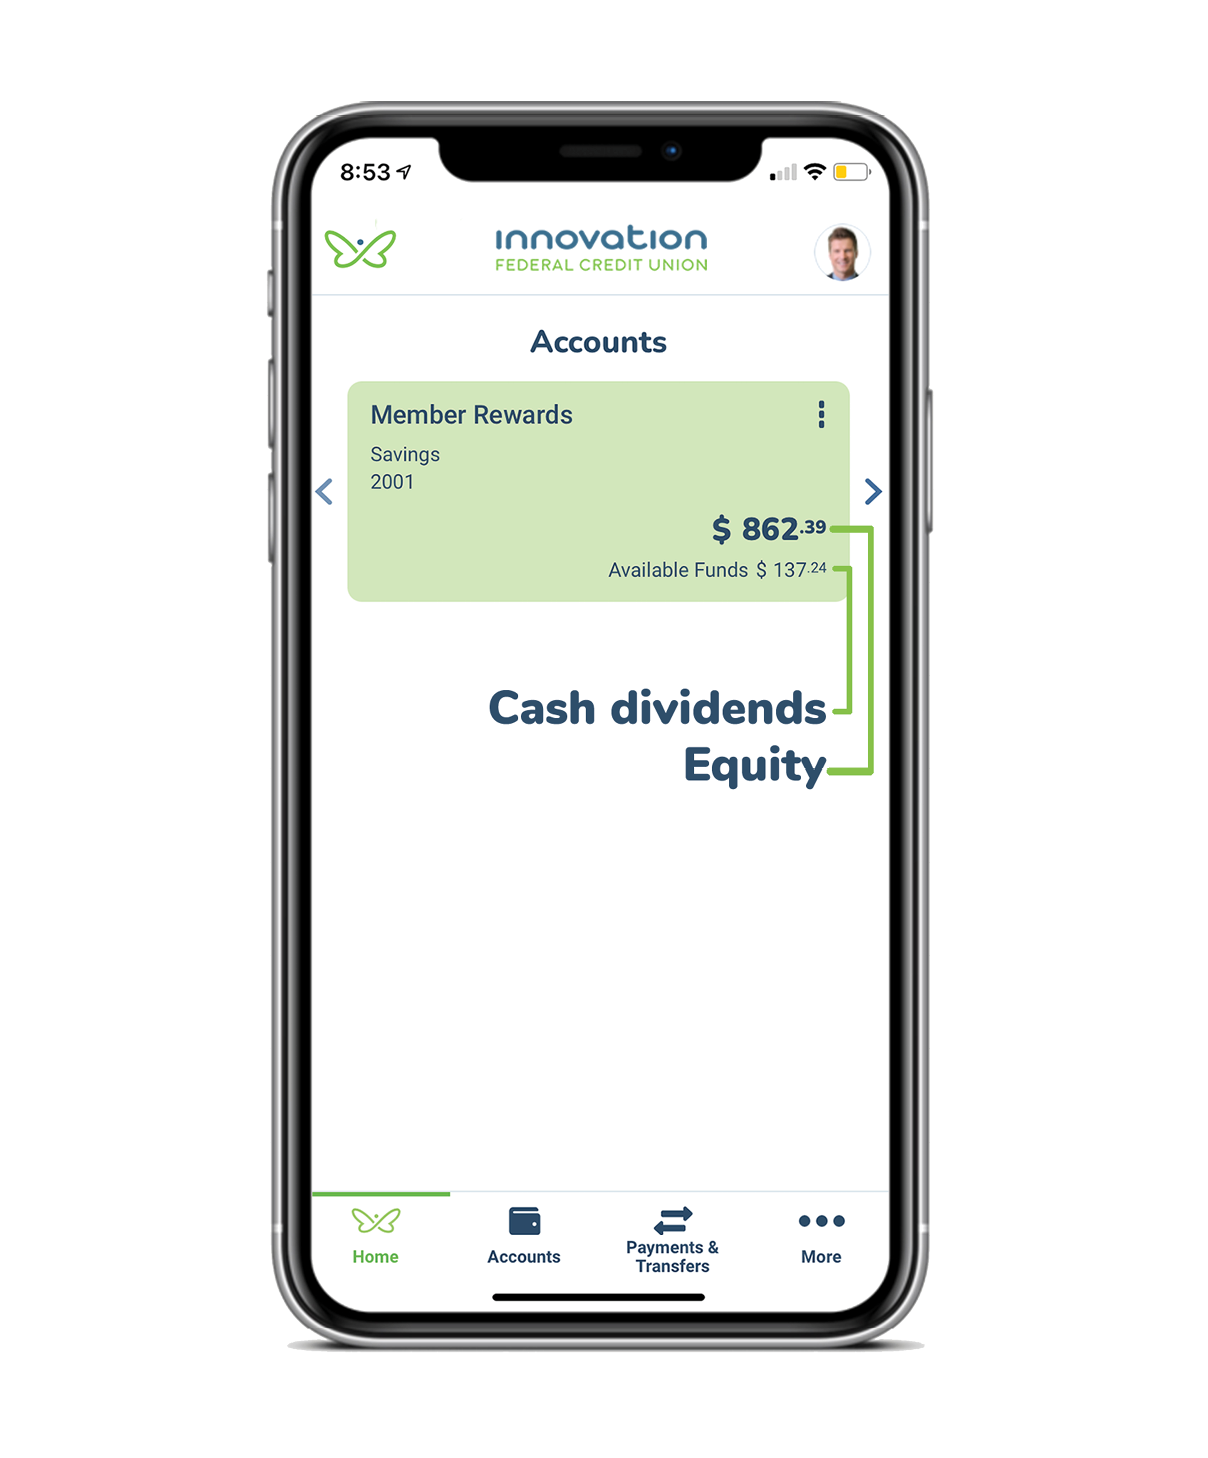 Mobile phone displaying cash dividends and equity on the Innovation app